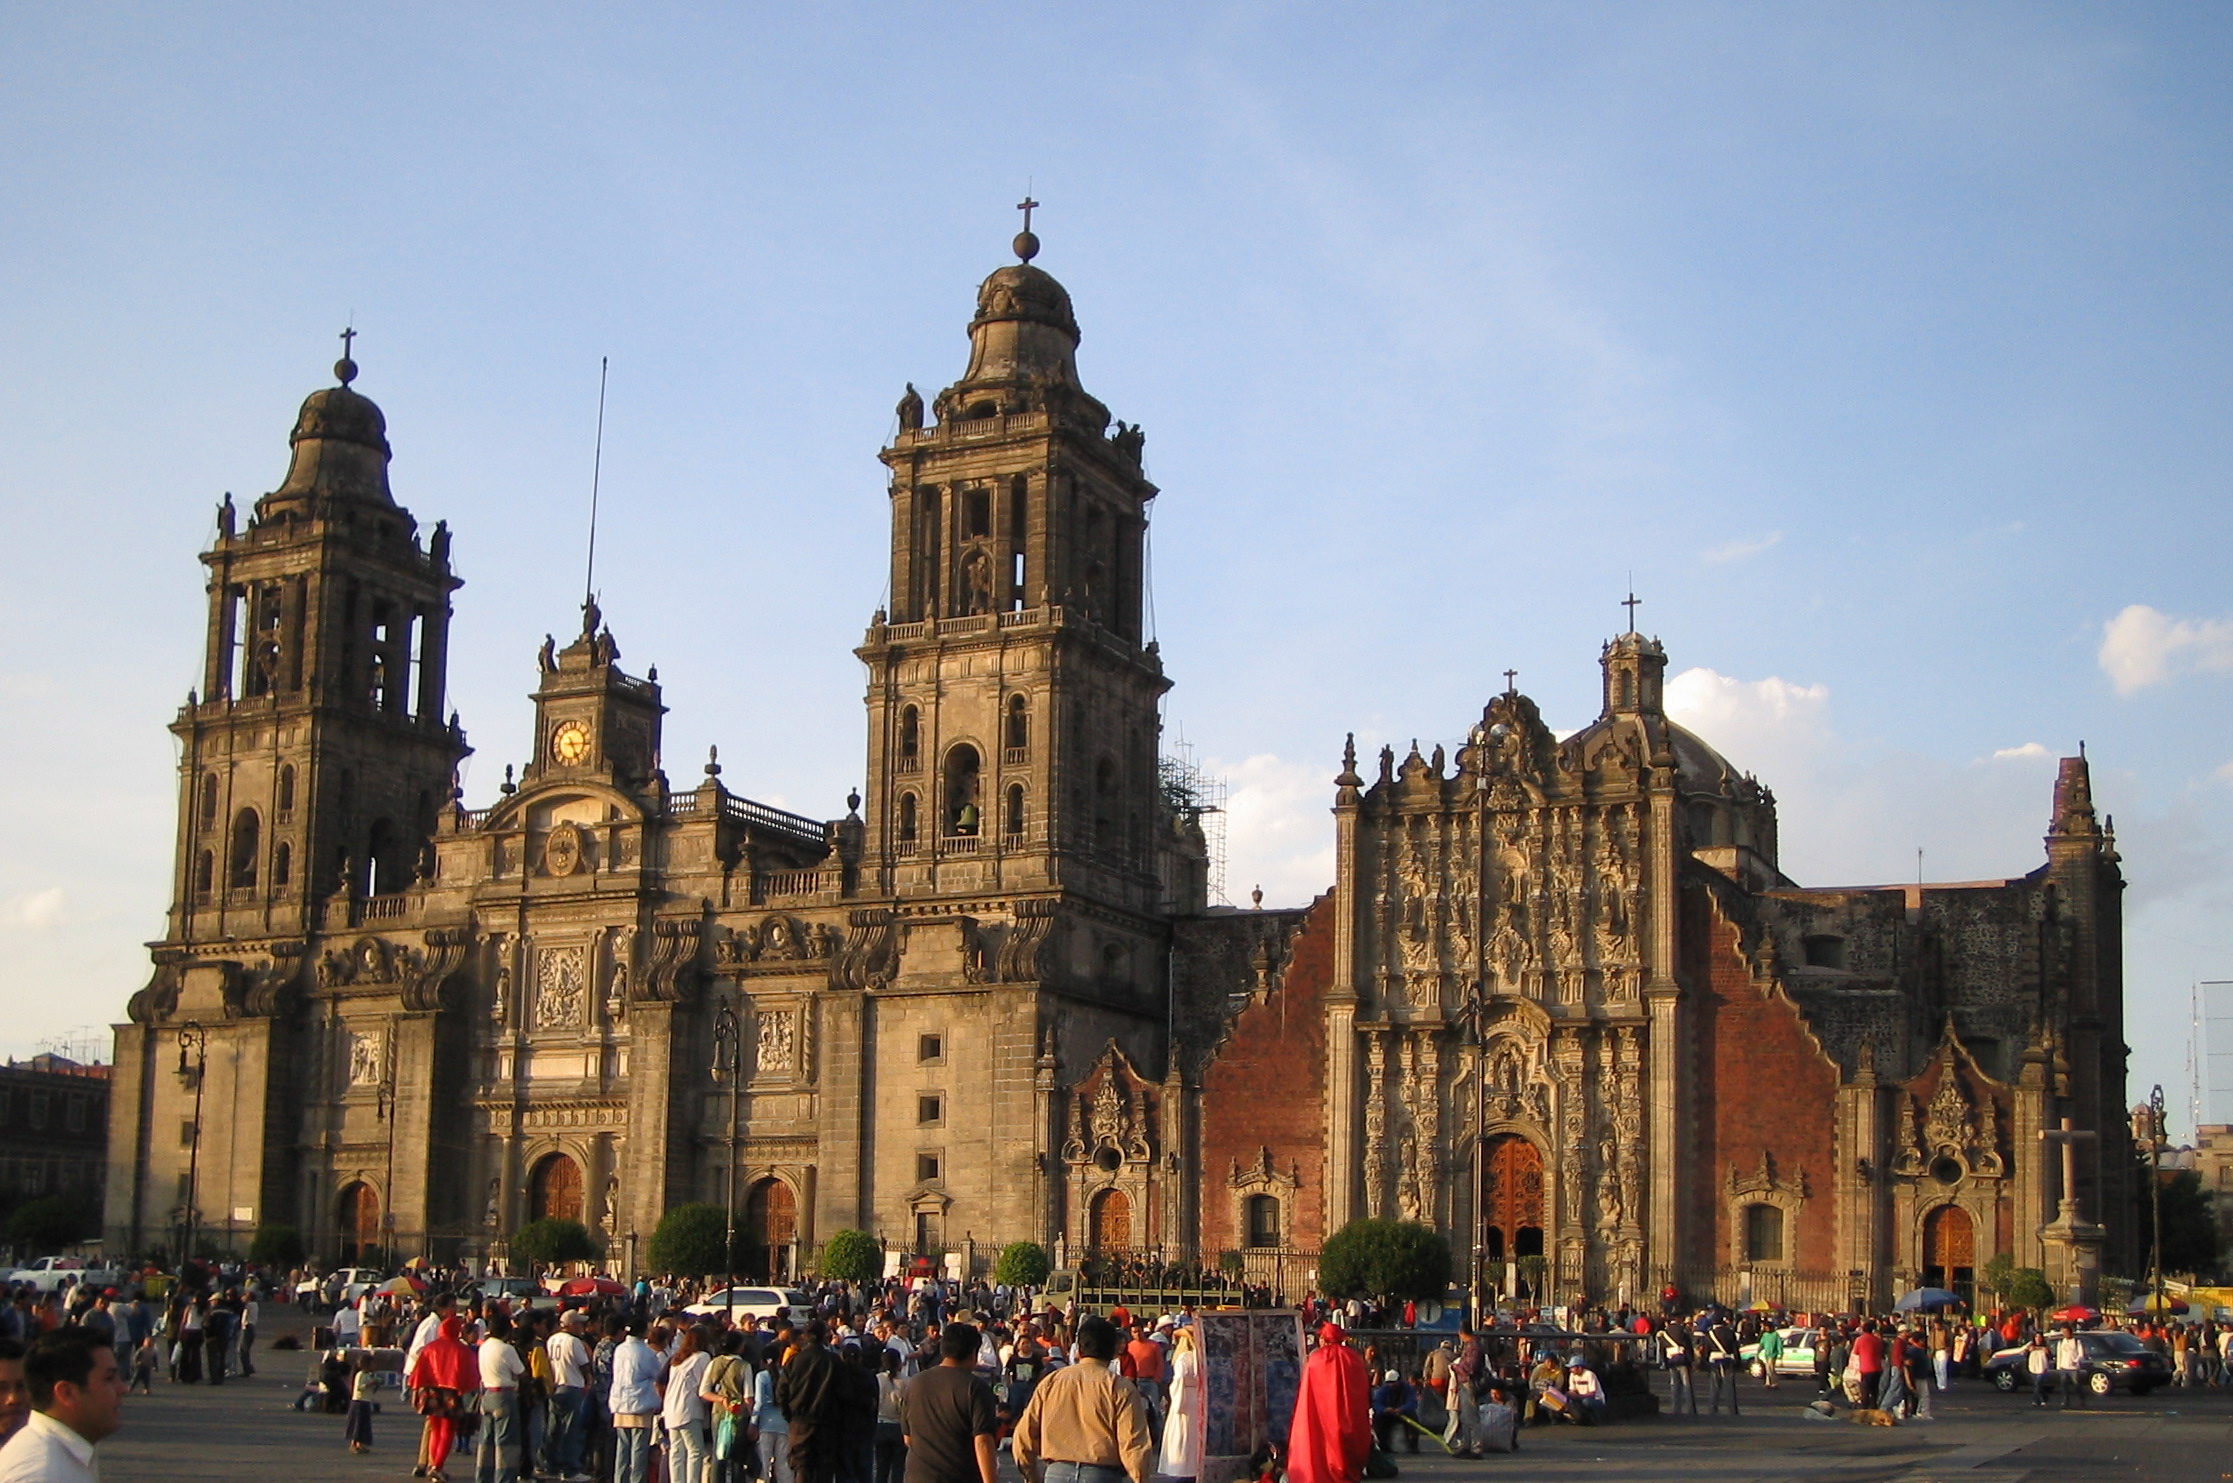 The metropolitan cathedral of Mexico City